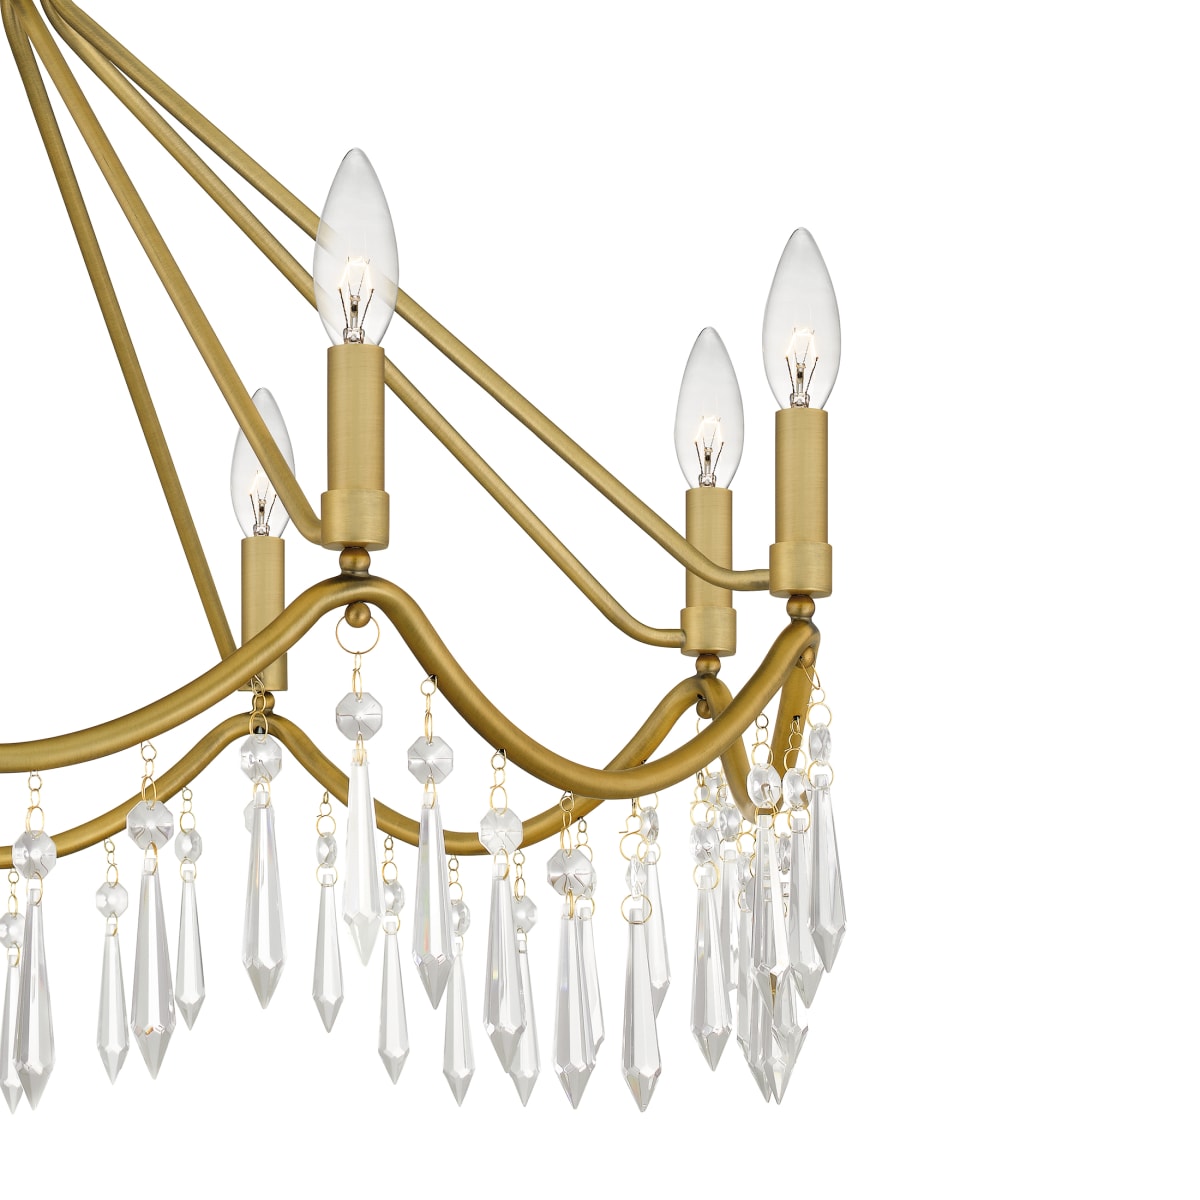 Airedale 8-Light Chandelier